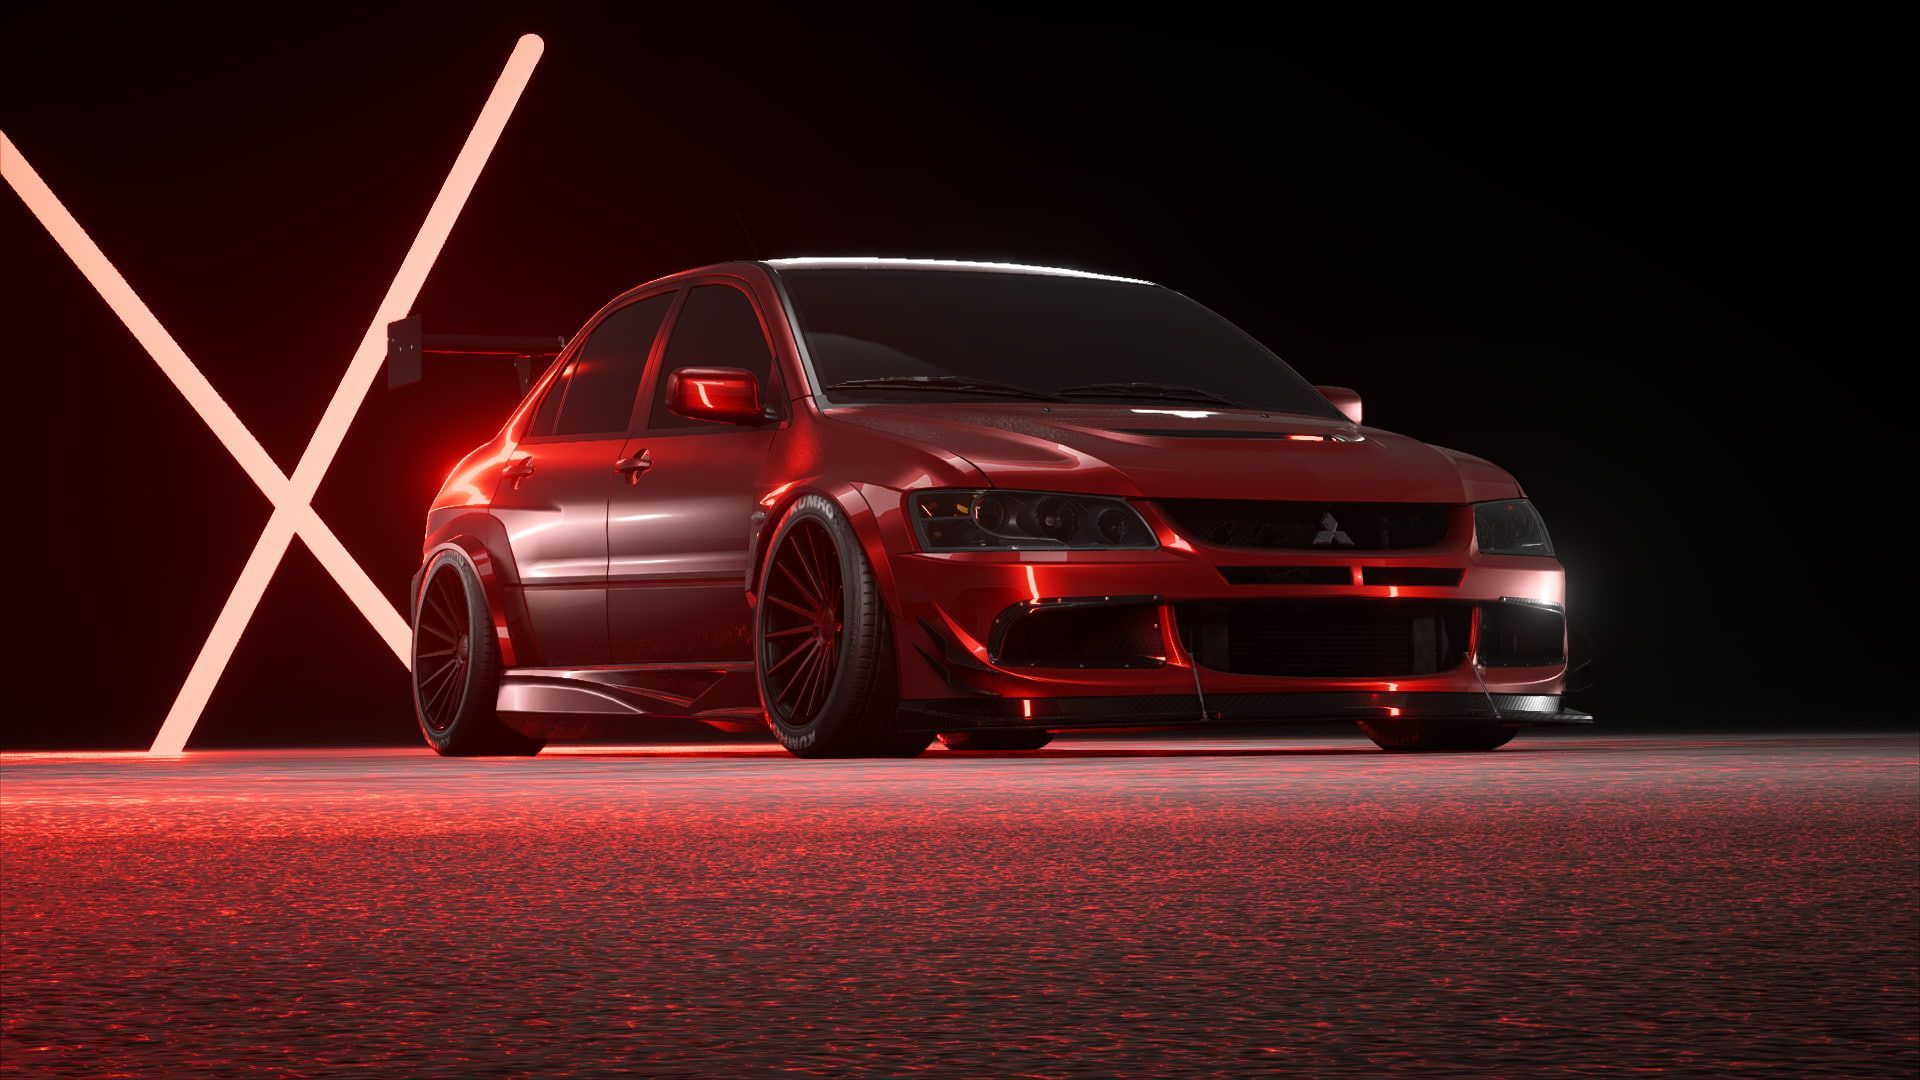 evo Mitsubishi Lancer Evo X #red Need for Speed #car need for speed payback red cars #vehicle P #wallpaper #hdwallpaper #desk. Evo x, Mitsubishi lancer, Evo